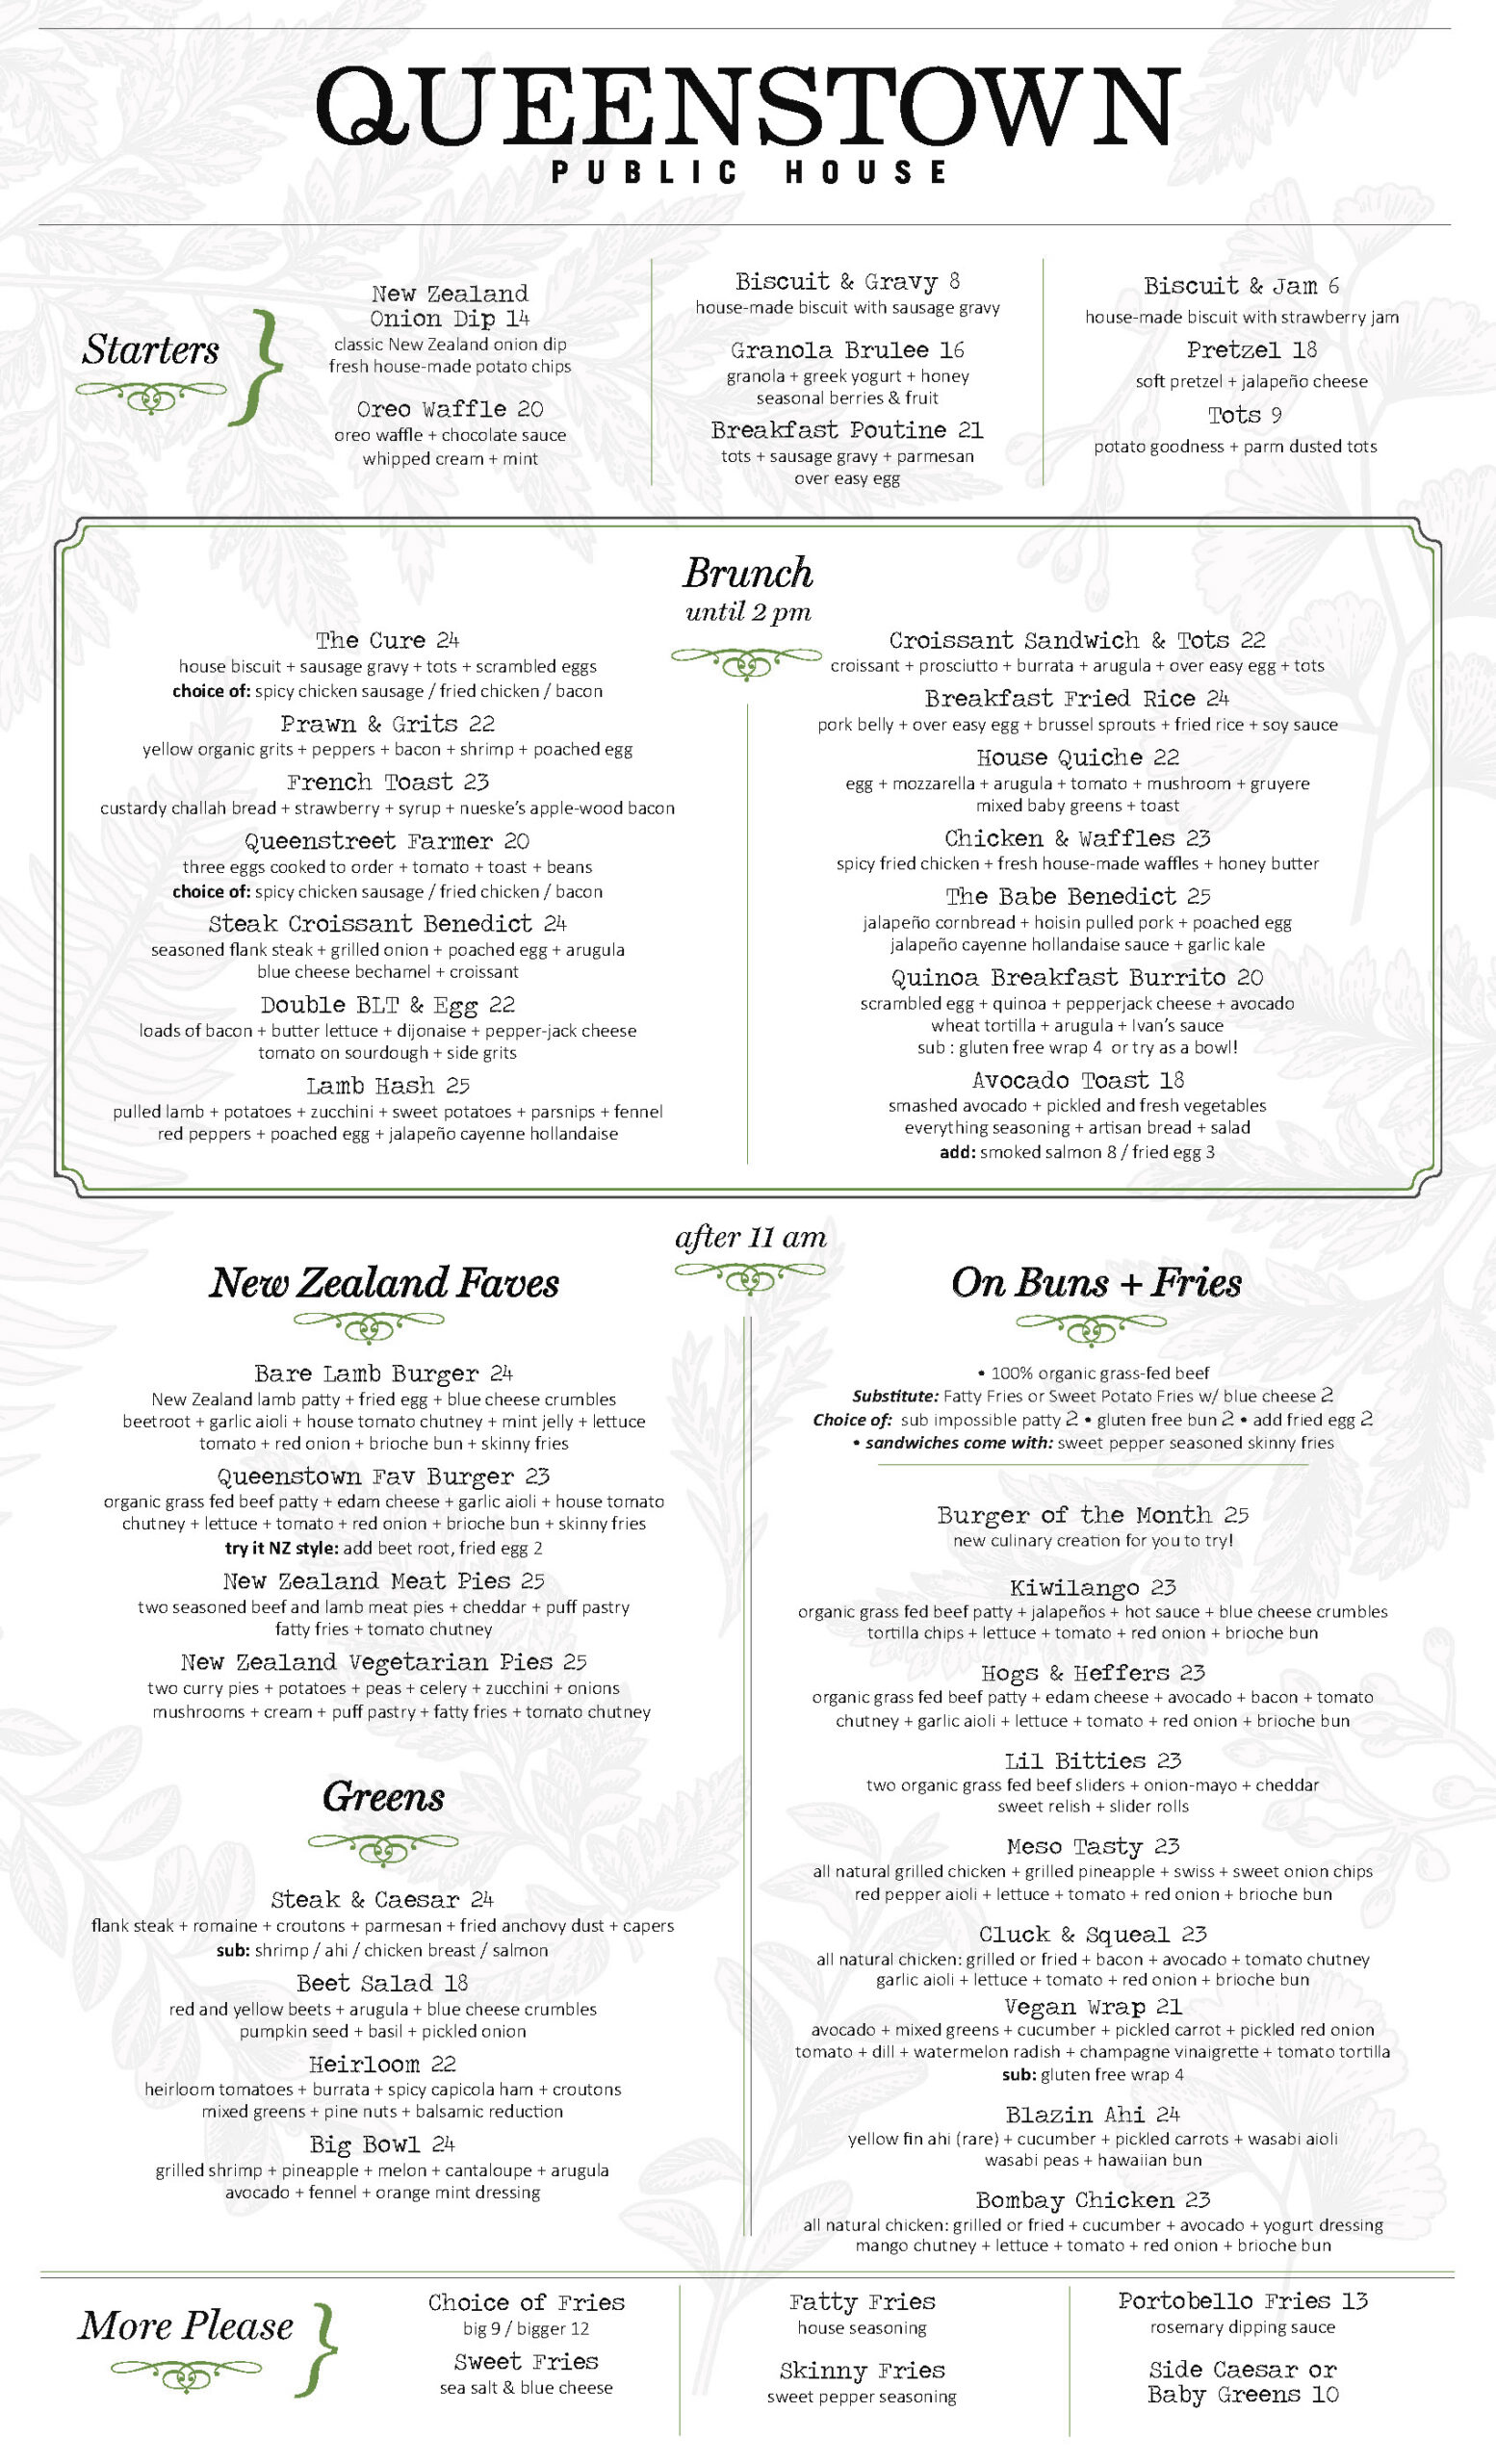 Brunch Menu sat & sun 9 am. to 3 pm. Starters New Zealand Onion Dip 14 classic new zealand onion dip + house made potato chips Oreo Waffle 20 oreo waffle + chocolate sauce + whipped cream + mint Biscuit & Gravy 8 house-made biscuit + sausage gravy Biscuit & Jam 6 house-made biscuit + strawberry jam Granola Brulee 16 granola + greek yogurt + honey + seasonal berries + fruit Breakfast Poutine 21 tots + sausage gravy + parmesan + over easy egg Tots potato goodness + parm dusted tots Pretzel soft pretzel + jalapeño cheese Brunch until 2 pm. The Cure 24 house biscuit + sausage gravy + tots + scrambled eggs your choice of: spicy chicken sausage/ fried chicken/ bacon Prawn & Grits 22 yellow organic grits + peppers + bacon + shrimp + poached egg French Toast 23 custardy challah bread + strawberries + syrup + nueske’s applewood smoked bacon Queenstreet Farmer 20 three eggs cooked to order + tomato + toast + beans + your choice of: spicy chicken sausage/ fried chicken/ bacon Steak Benedict Croissant 24 seasoned flank steak + grilled onions + poached egg + arugula + blue cheese bechamel + croissant Double BLT & Egg 22 loads of bacon + butter lettuce + dijonaise + pepper-jack cheese + tomato + sourdough + side of grits Lamb Hash 25 pulled lamb + potatoes + zucchini + sweet potatoes + parsnips + fennel + red peppers + poached egg + jalapeño cayenne hollandaise Croissant Sandwich & Tots 22 croissant + prosciutto + burrata + arugula + over easy egg + tots Breakfast Fried Rice 24 pork belly + over easy egg + brussels sprouts + fried rice + soy sauce House Quiche 22 egg + mozzarella + arugula + tomato + mushroom + gruyere + mixed baby greens + toast Chicken & Waffles 23 spicy fried chicken + fresh house-made waffles + honey butter The Babe Benedict 25 jalapeño cornbread + hoisin pulled pork + poached egg + jalapeño cayenne hollandaise sauce + garlic kale Quinoa Breakfast Burrito 20 scrambled egg + quinoa + pepperjack cheese + avocado + wheat tortilla + arugula + ivan’s sauce try as a bowl or gluten free wrap available Avocado Toast 18 smashed avocado + pickled and fresh vegetables + everything seasoning + artisan bread + salad add: smoked salmon 8 / fried egg 3 New Zealand Faves Bare Lamb Burger 24 new zealand lamb patty + fried egg + beetroot + mint jelly + blue cheese crumbles + garlic aioli + house tomato chutney + lettuce + tomato + red onion + brioche bun + skinny fries Queenstown Fav Burger 23 organic grass fed beef patty + edam cheese + garlic aioli + house tomato chutney + lettuce + tomato + red onion + brioche bun + skinny fries try it nz style: beetroot + fried egg 2 New Zealand Meat Pies 25 two seasoned beef and lamb meat pies + cheddar + puff pastry + fatty fries + tomato chutney New Zealand Vegetarian Pies 25 two curry pies + potatoes + peas + carrots + celery + onions + mushrooms + zucchini + cream + puff pastry + fatty fries + tomato chutney Greens Steak & Caesar 24 flank steak + romaine + croutons + parmesan + fried anchovy dust + capers (sub: shrimp/ahi/chicken breast/salmon) Beet Salad 18 red & yellow beets + arugula + blue cheese crumbles + pumpkin seed + basil + pickled onion Heirloom 22 heirloom tomatoes + burrata + spicy capicola ham + croutons + mixed greens + pine nuts + balsamic reduction Big Bowl 24 grilled shrimp + pineapple + melon + cantaloupe + arugula + avocado + fennel + orange mint dressing On Buns + Fries substitute: fatty fries or sweet potato fries w/ blue cheese 2 choice of: sub impossible patty 2, gluten free bun 2 add fried egg 2 all sandwiches come with: sweet pepper seasoned skinny fries Burger of the Month 25 new culinary creation for you to try! Kiwilango 23 organic grass fed beef patty + jalapeños + hot sauce + blue cheese crumbles + tortilla chips + lettuce + tomato + red onion + brioche bun Hogs & Heffers 23 organic grass fed beef patty + edam cheese + avocado + bacon + tomato chutney + garlic aioli + lettuce + tomato + red onion + brioche bun Lil Bitties 23 two organic grass fed beef sliders + onion-mayo + cheddar + sweet relish + slider rolls Meso Tasty 23 all natural grilled chicken + grilled pineapple + swiss + sweet onion chips + red pepper aioli + lettuce + tomato + red onion + brioche bun Cluck & Squeal 23 all natural grilled chicken (grilled or fried) + bacon + avocado + tomato chutney + garlic aioli + lettuce + tomato + red onion + brioche bun Vegan Wrap 21 avocado + mixed greens + cucumber + pickled carrot + pickled red onion + tomato + dill + watermelon radish + champagne vinaigrette + tomato tortilla (sub: gluten free wrap) Blazin Ahi 24 yellow fin ahi (rare) + cucumber + pickled carrots + wasabi aioli + wasabi peas + hawaiian bun Bombay Chicken 23 all natural chicken (grilled or fried) + cucumber + avocado + yogurt dressing + mango chutney + lettuce + tomato + red onion + brioche bun More Please fatty house seasoning big 9 / bigger 12 skinny sweet pepper seasoning big 9 / bigger 12 sweet sea salt & blue cheese big 9 / bigger 12 portobello 13 panko breaded spears rosemary aioli side salad 10 caesar or baby greens